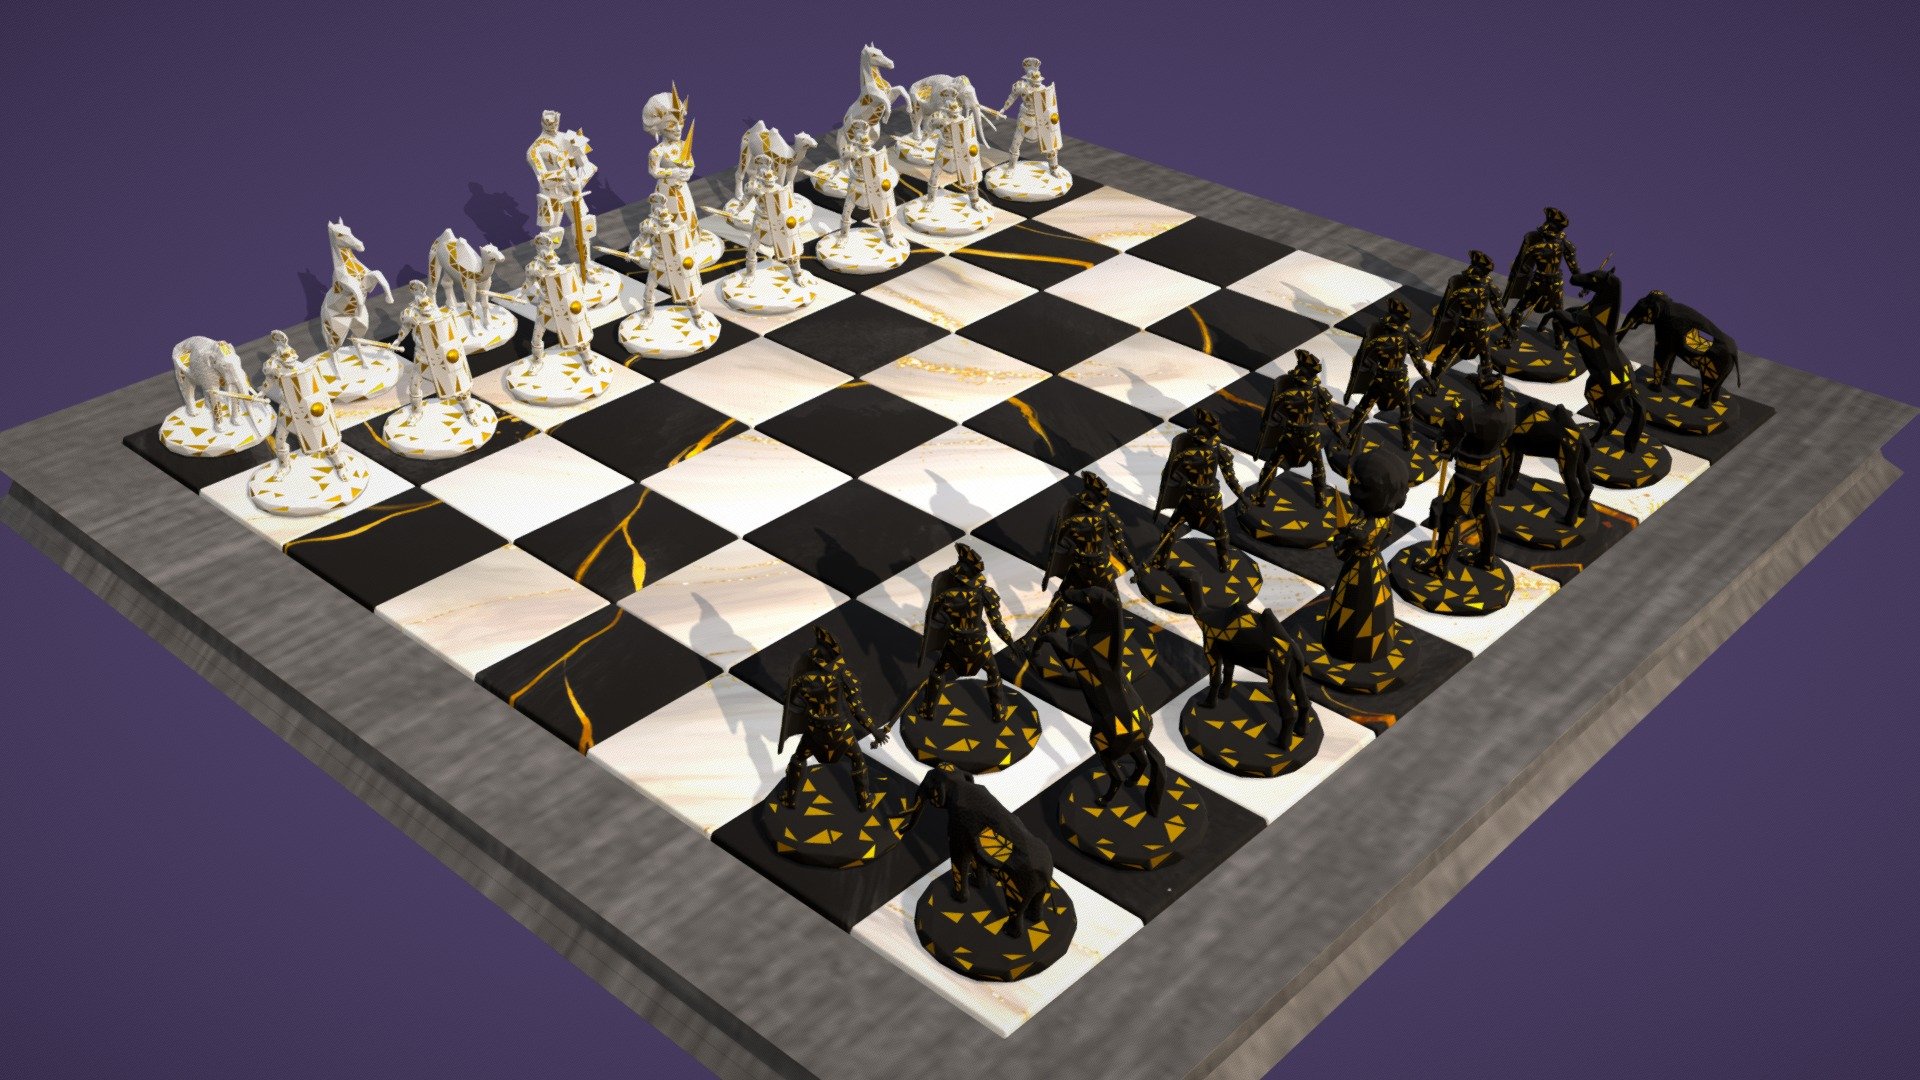 Welcome to the world of strategic gameplay with our Low Poly Chess Board Game Asset Pack. This comprehensive collection is designed to empower game developers, 3D artists, and hobbyists to create captivating chess experiences with ease.

Ideal for:
Game Developers: Create chess games for a variety of platforms.
3D Artists: Use these assets in your portfolio or freelance projects.
Educational Projects: Teach the fundamentals of chess with engaging visuals.
Hobbyists: Enjoy creating your own chess experiences or mods 3d model